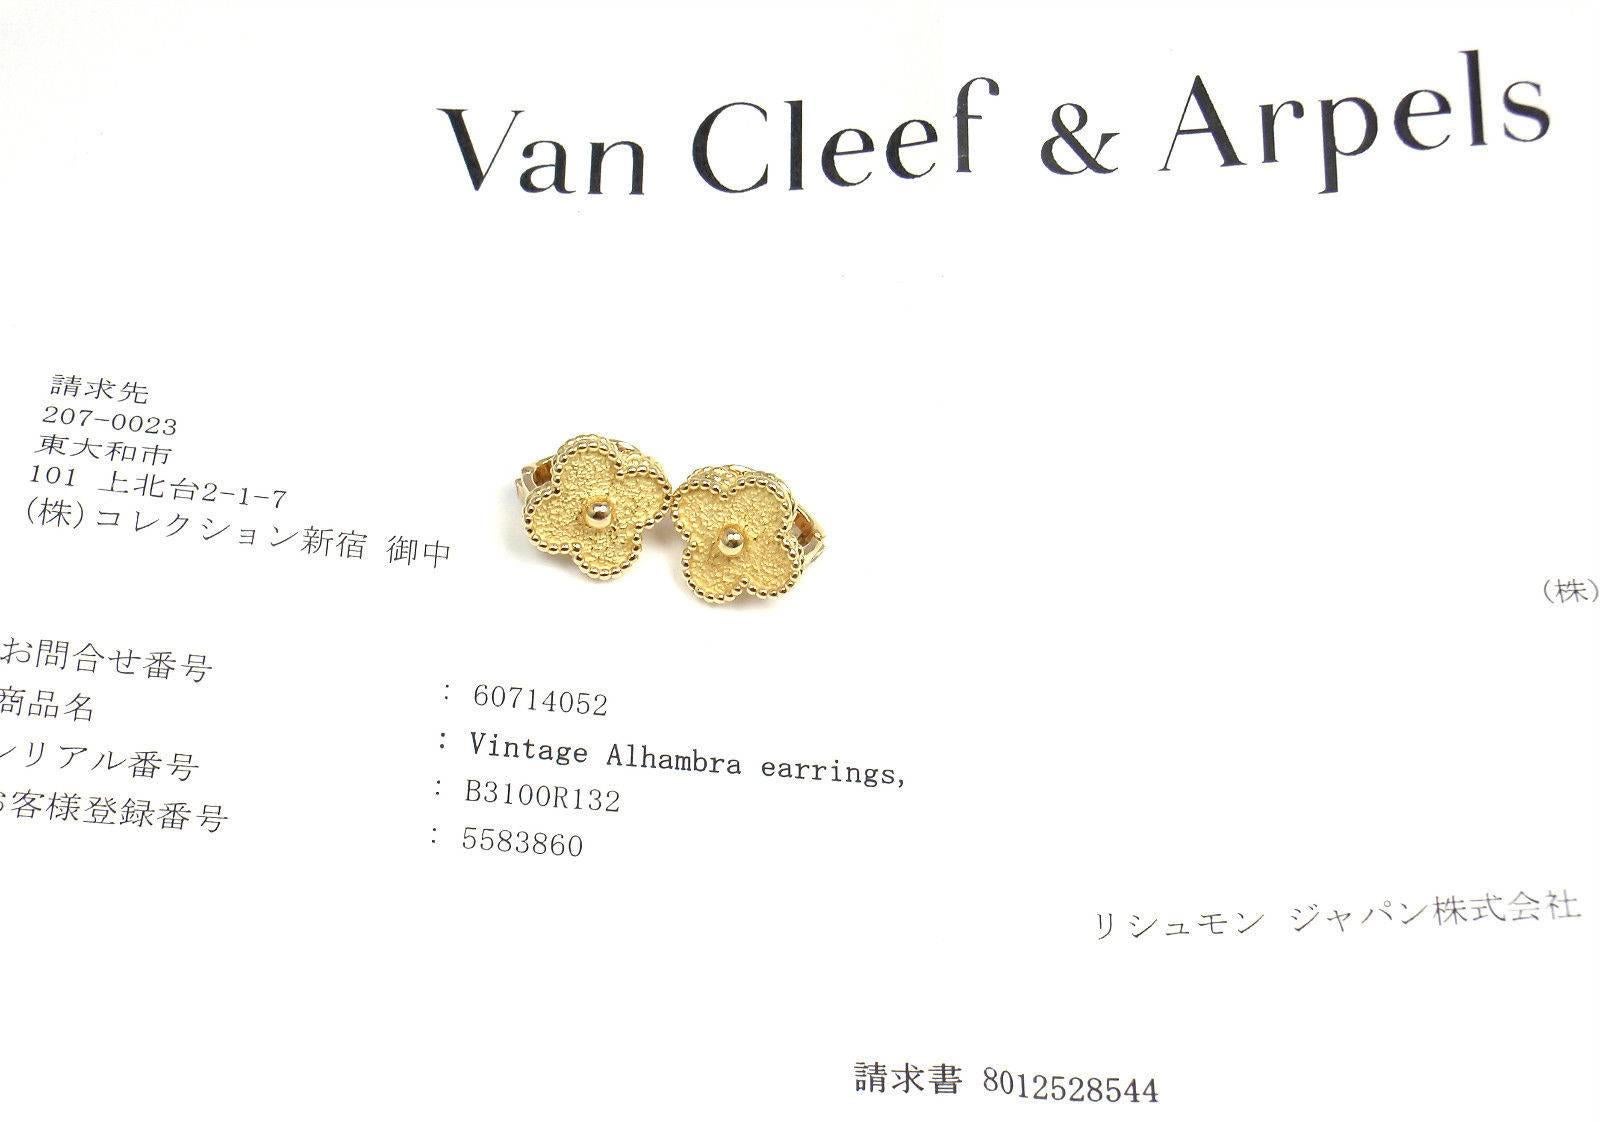 18k Yellow Gold Earrings by Van Cleef & Arpels.  
Part of VCA's Glorious Alhambra Vintage Collection.  
These earrings are for pierced ears and they come with a service paper from Van Cleef & Arpels store in Japan.
Details:  
Measurements: 15mm x